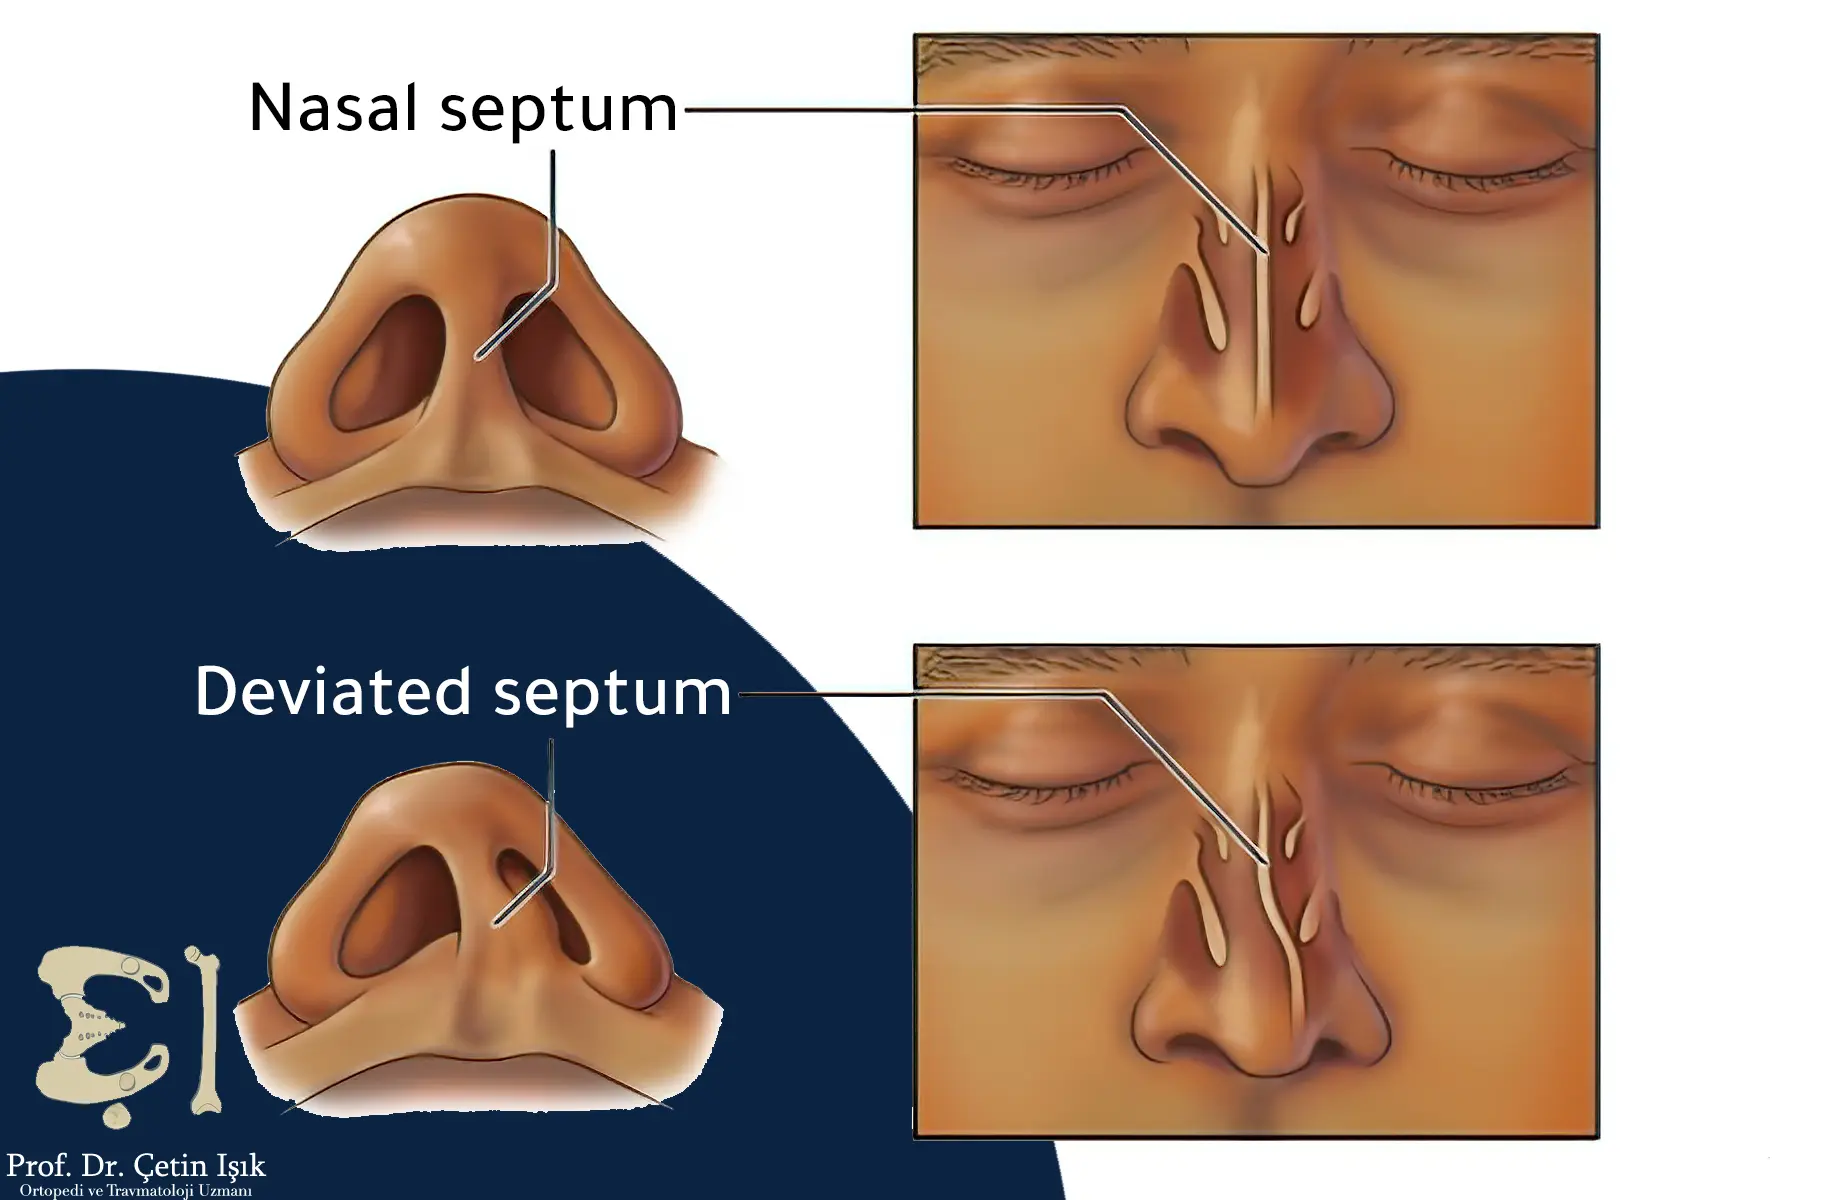 Image showing the deviation of the nasal septum from the midline